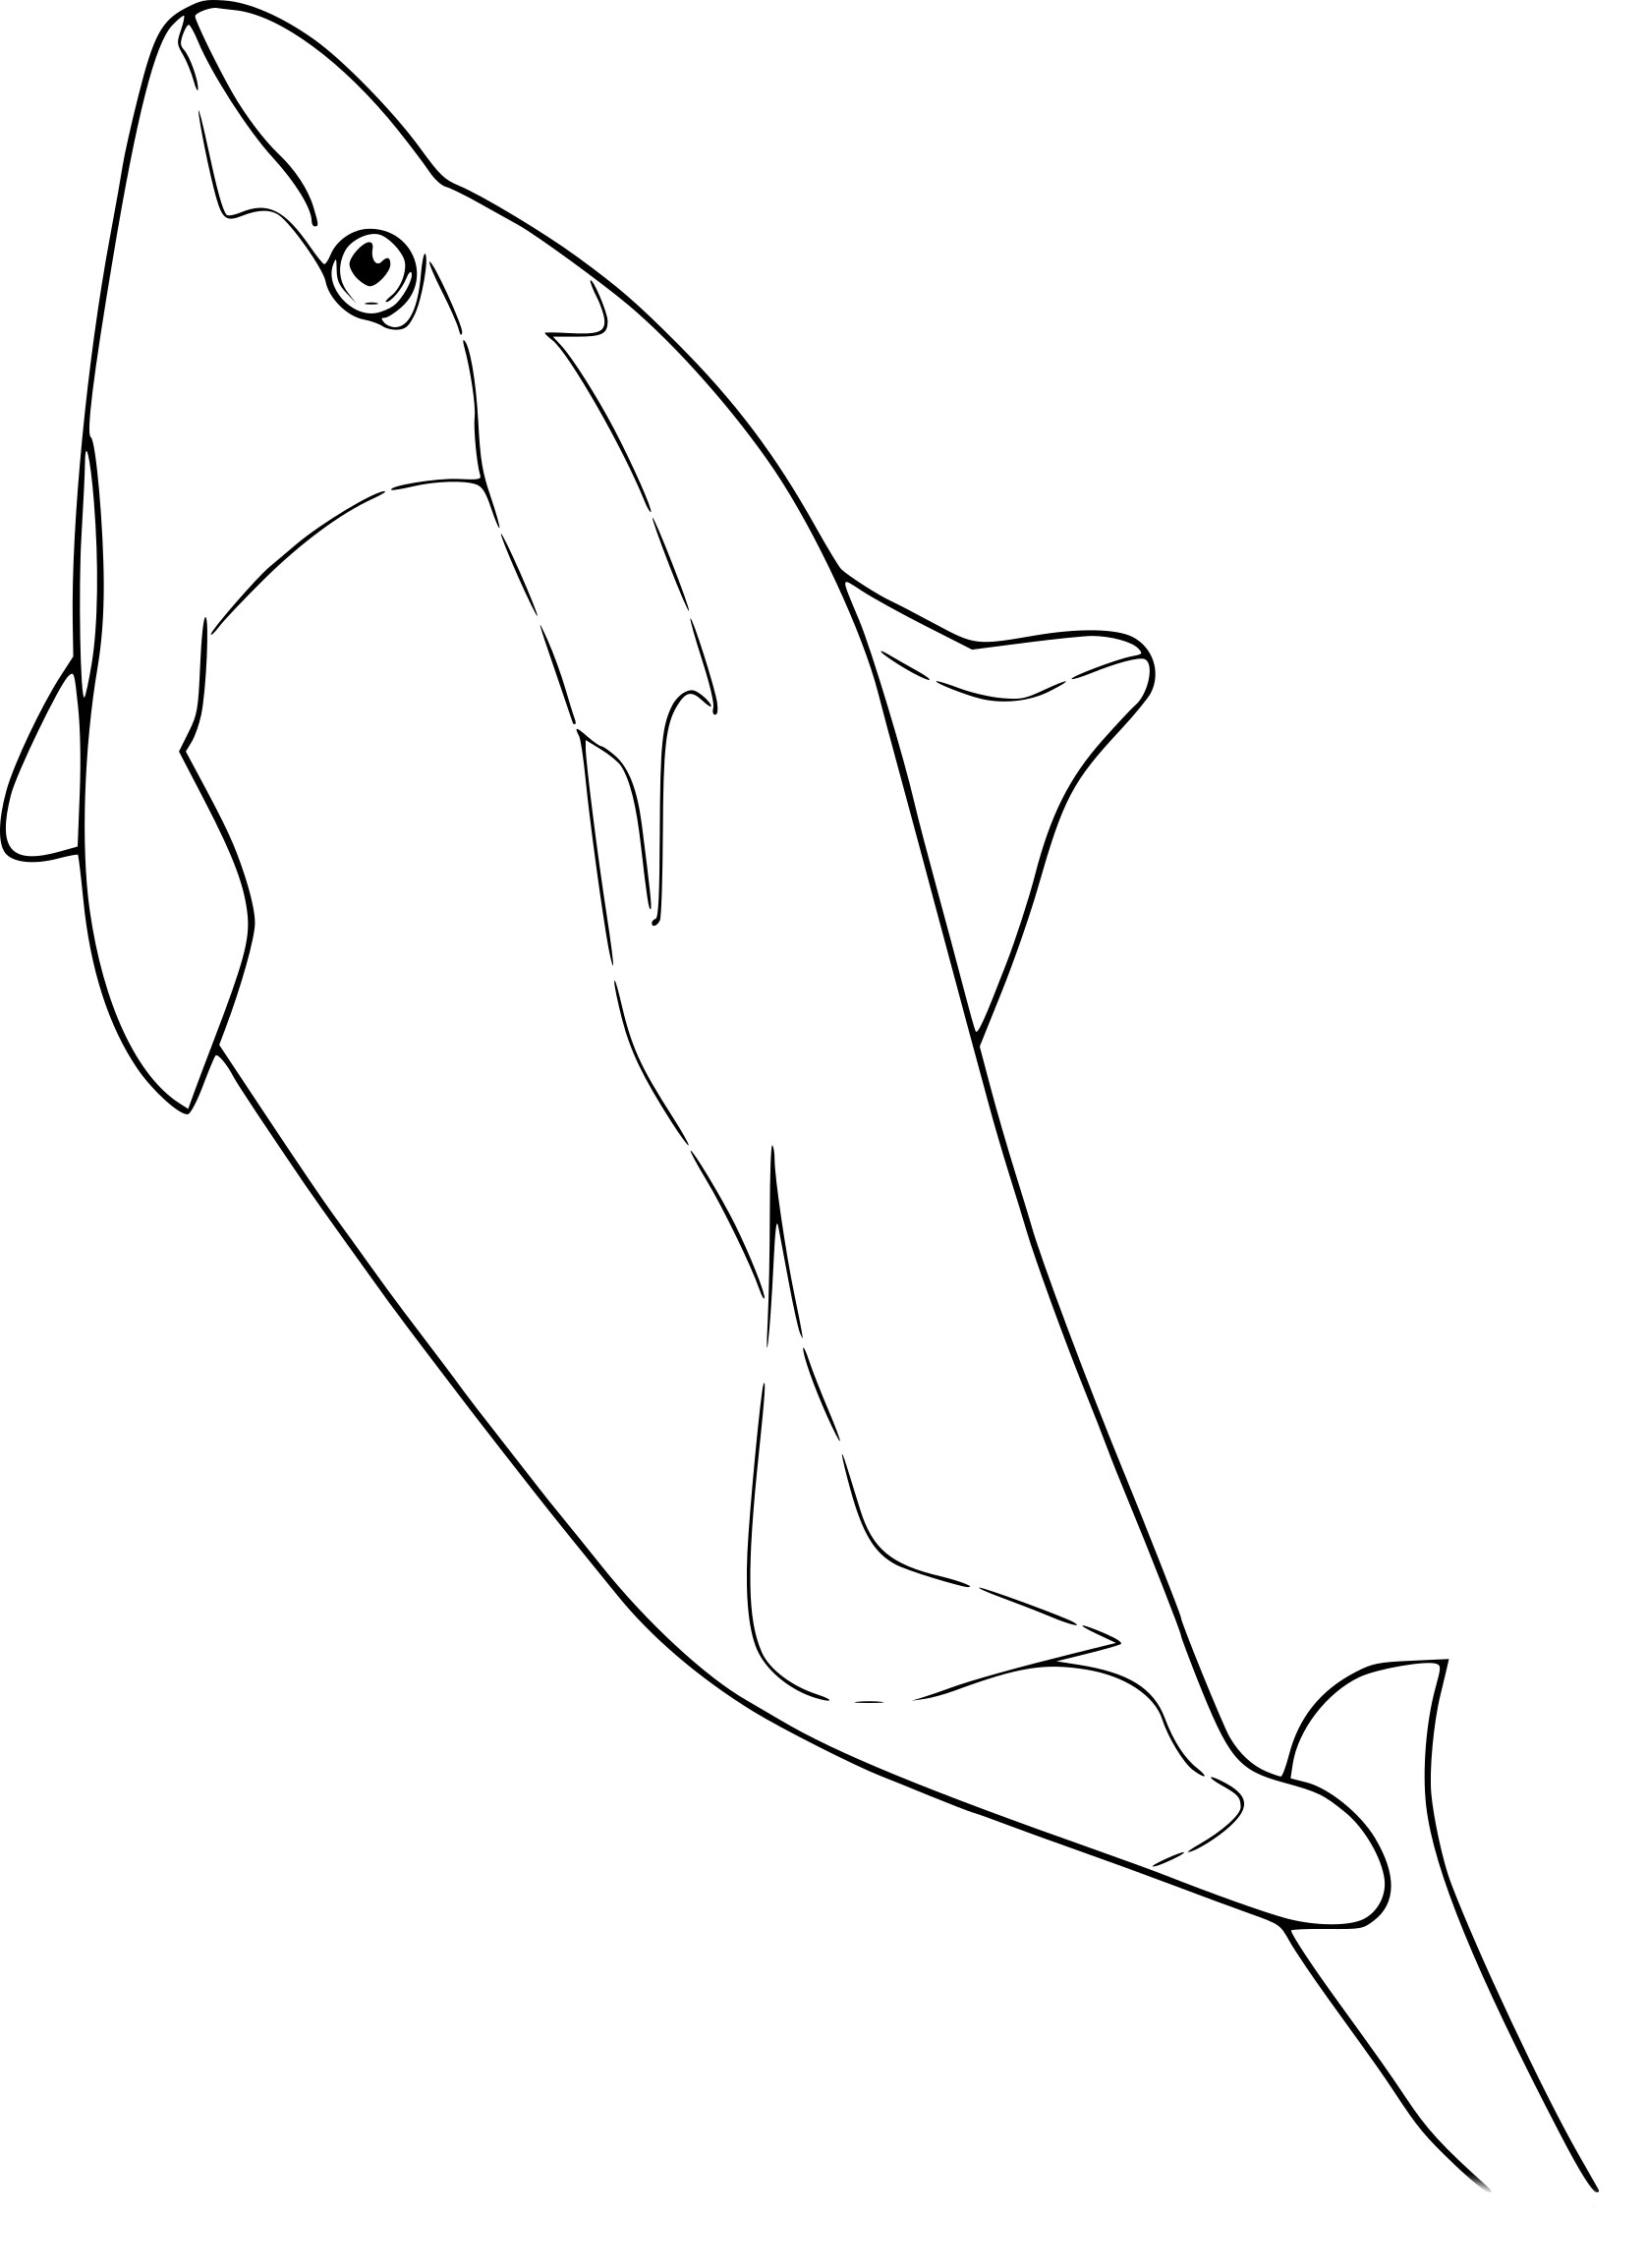 Porpoise drawing and coloring page